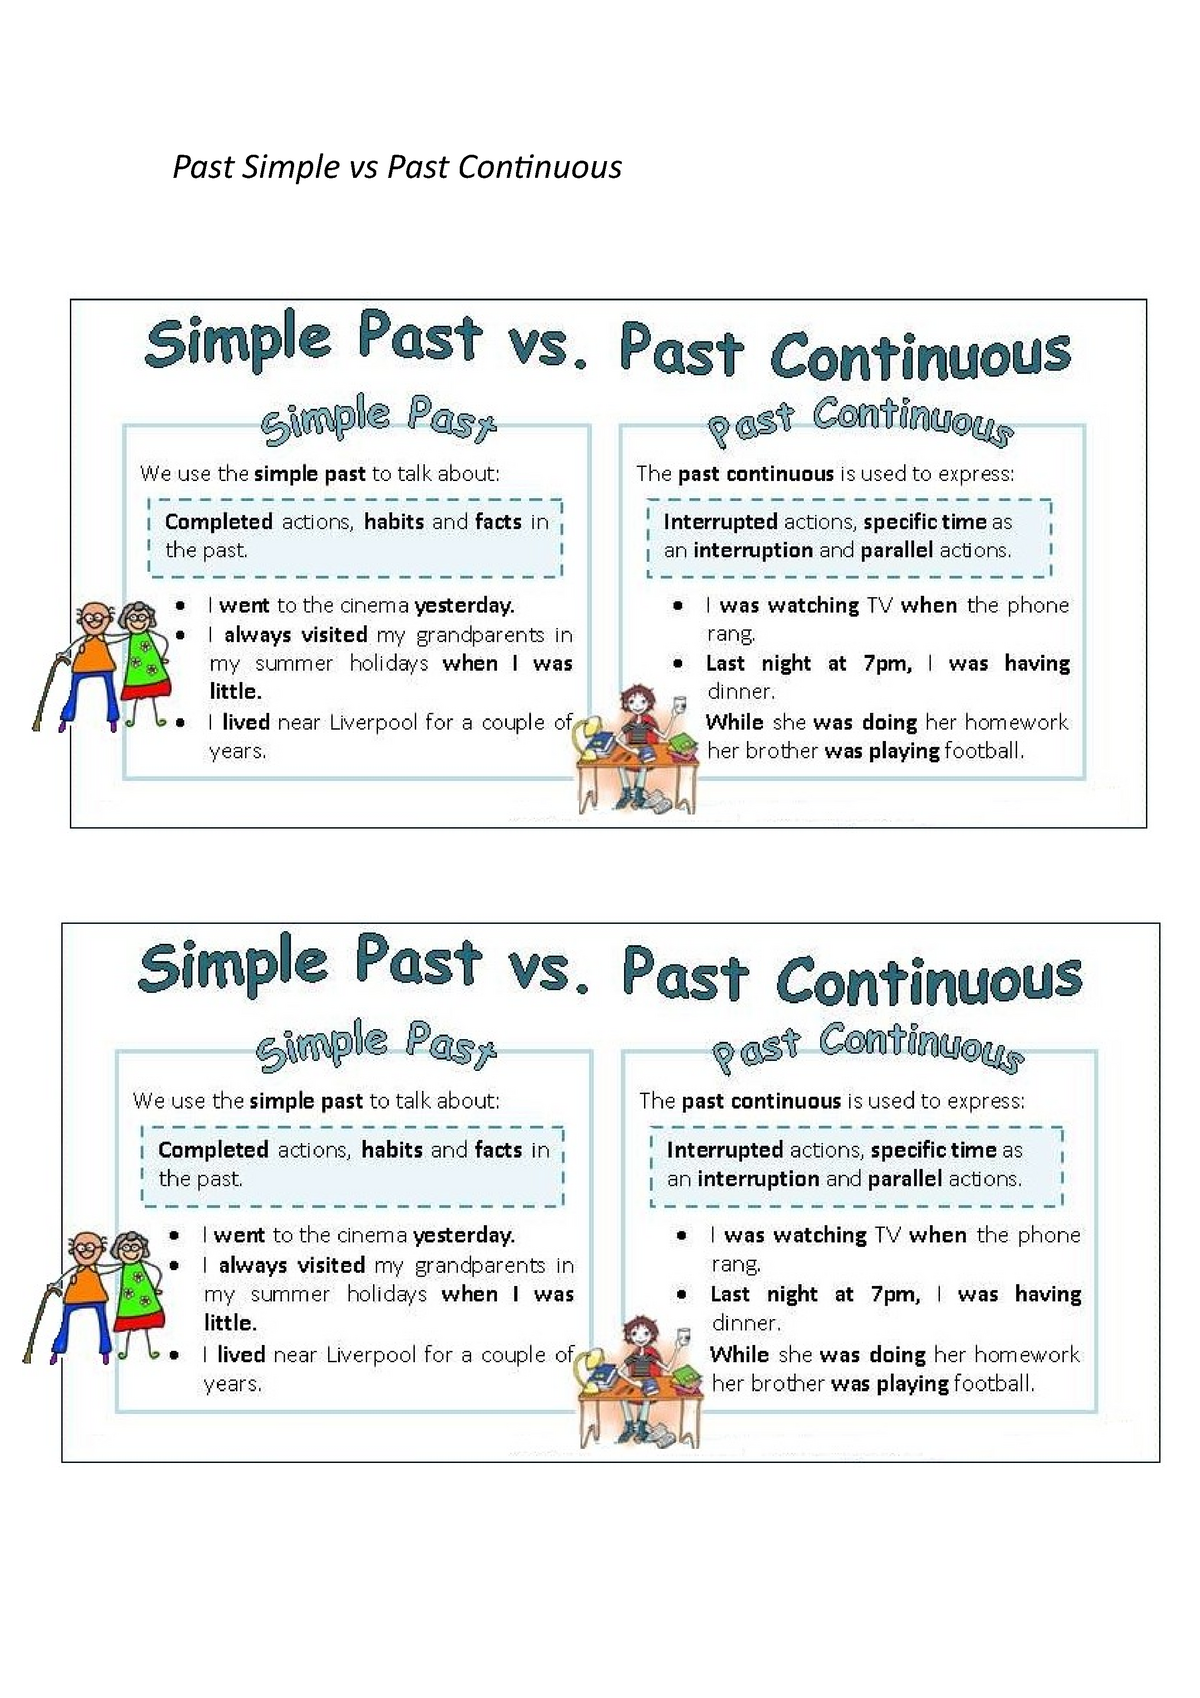 simple-past-vs-past-continuos-chart-ingl-s-past-simple-vs-past